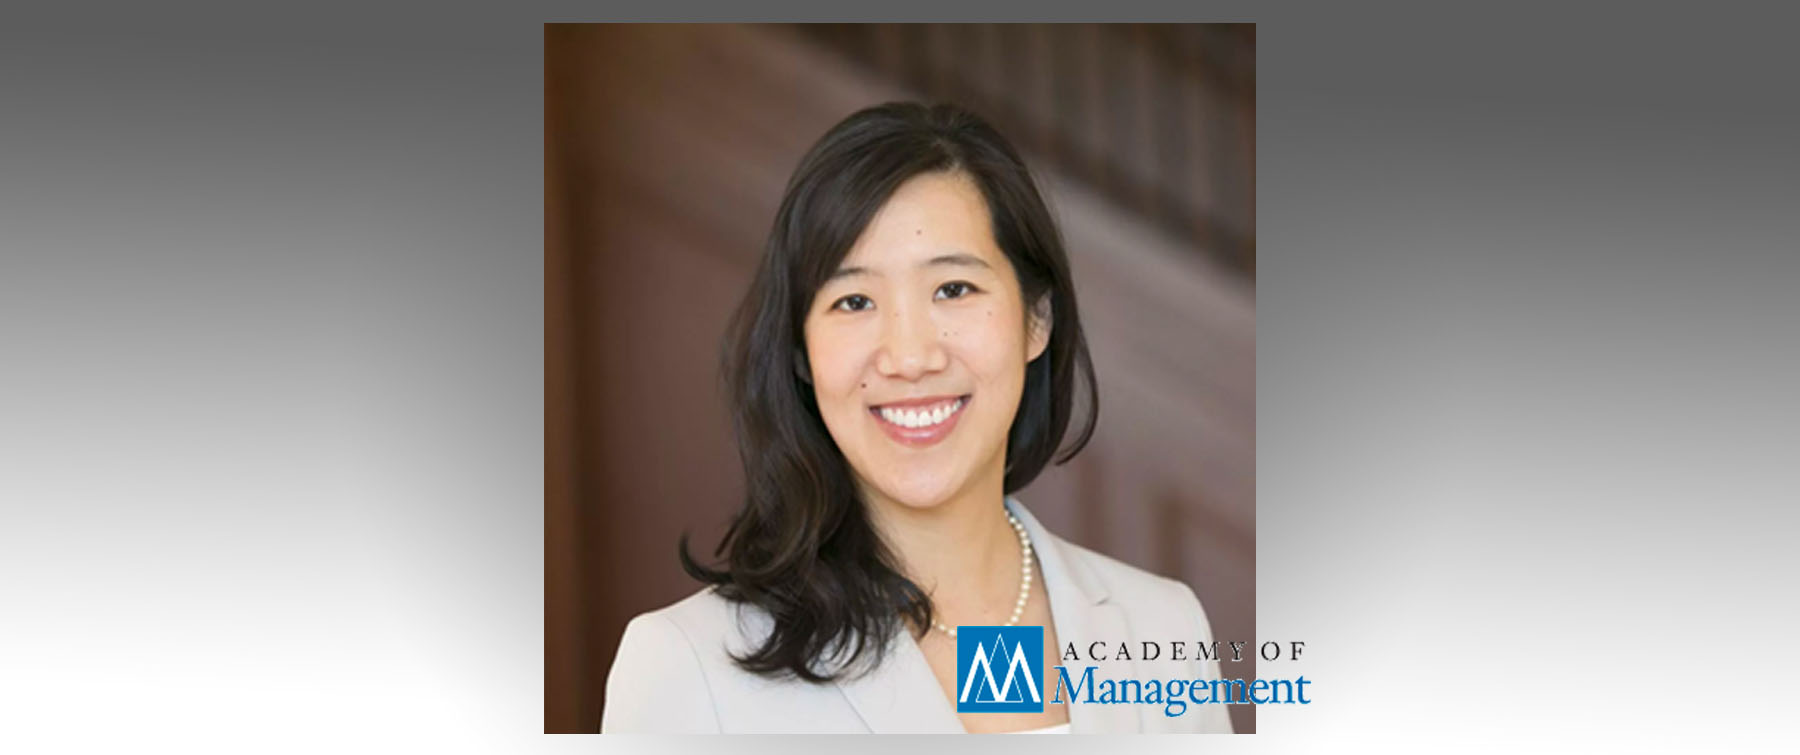 Professor Laura Huang's headshot with the Academy of Management logo